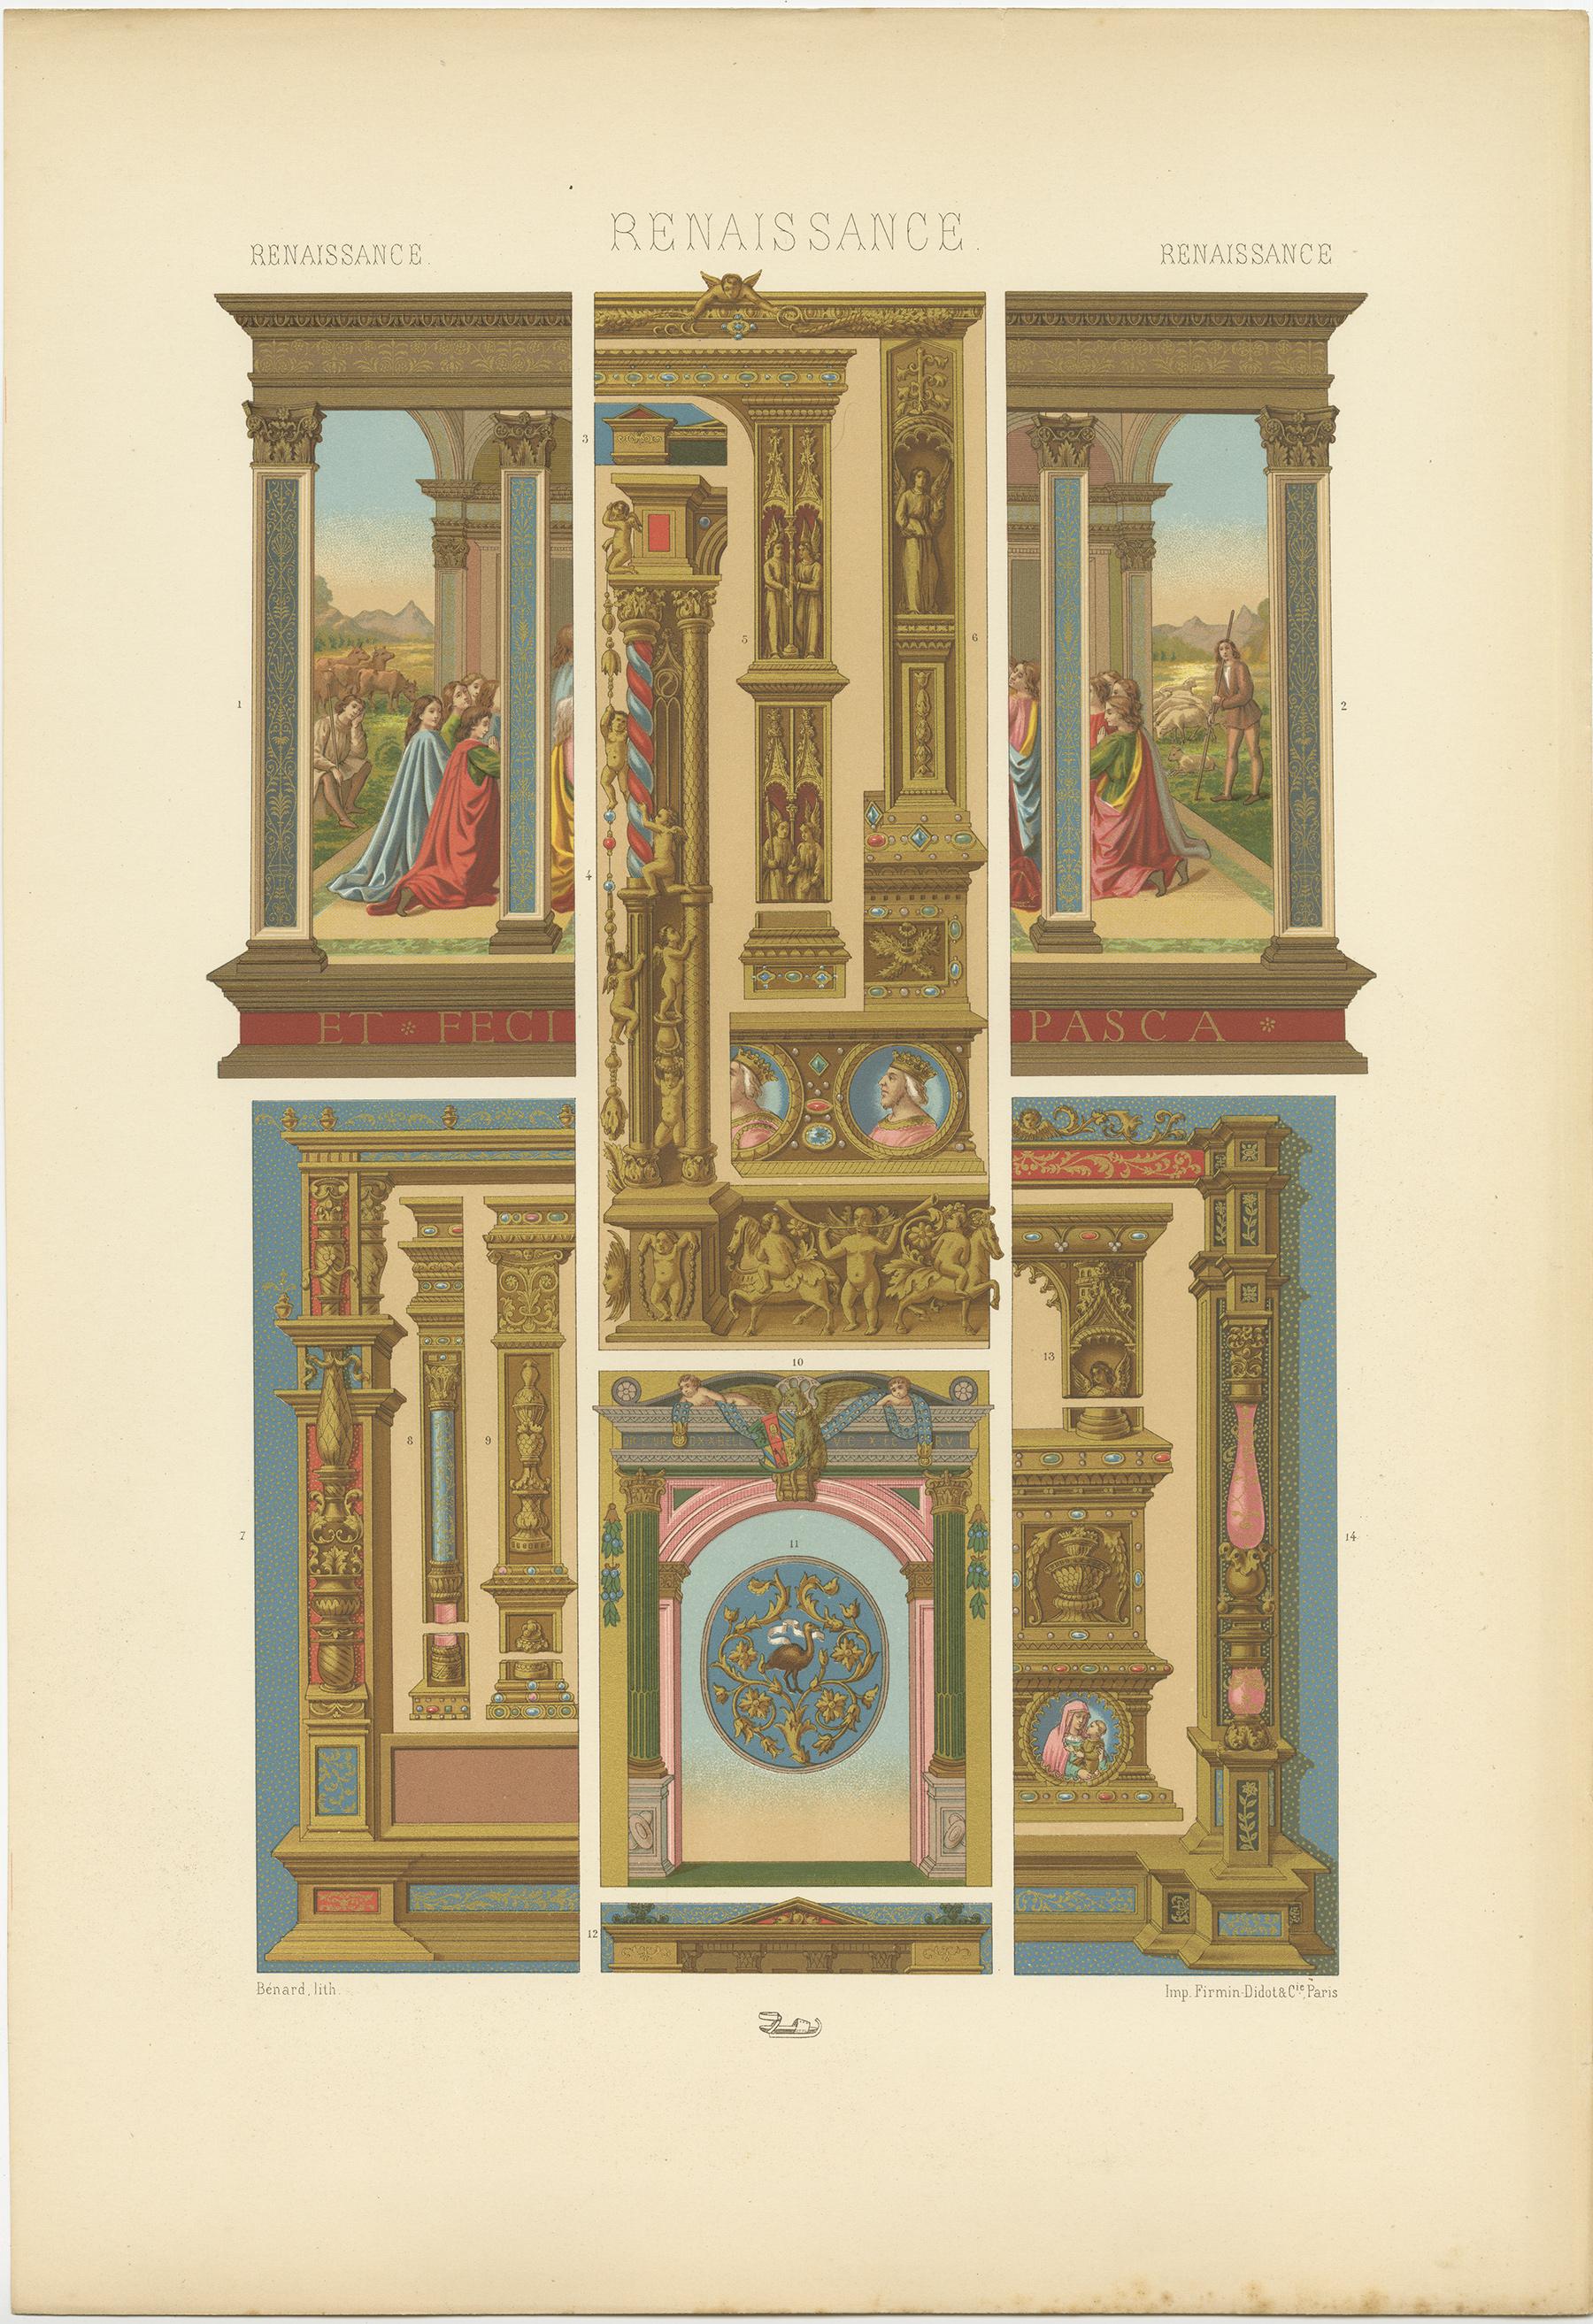 Antique print titled 'Renaissance - Renaissance - Renaissance'. Chromolithograph of architectural and metalwork motifs from Italian manuscripts ornaments. This print originates from 'l'Ornement Polychrome' by Auguste Racinet. Published circa 1890.